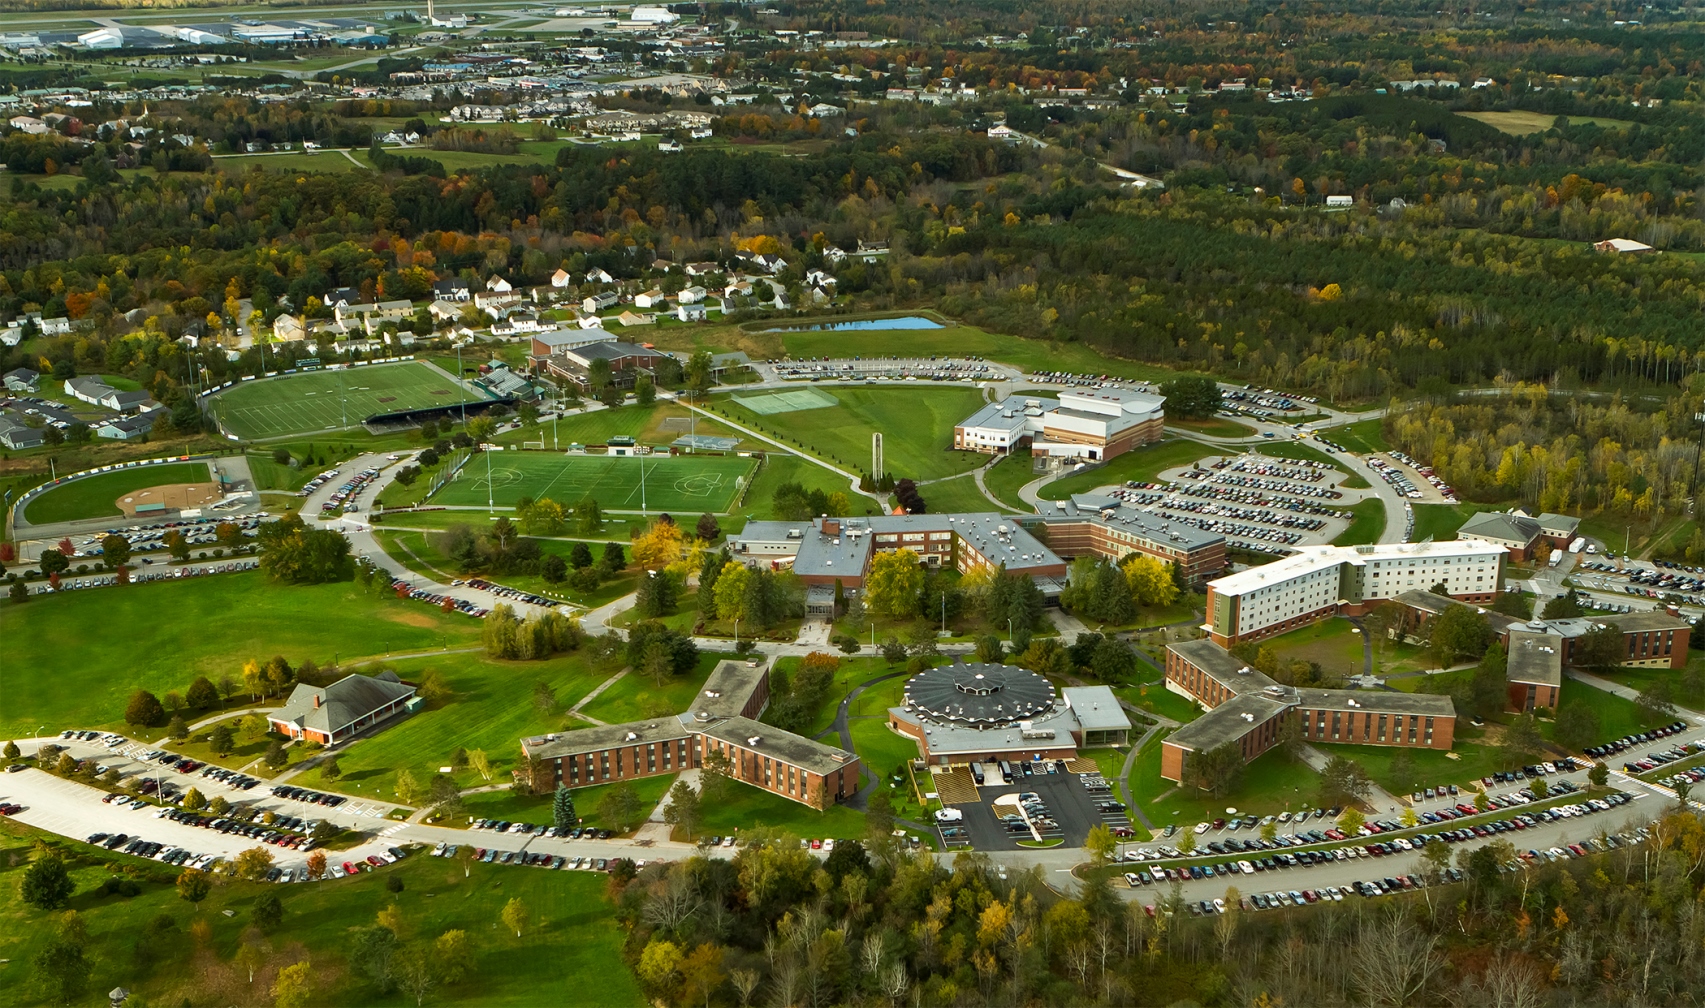 U.S. News & World Report Research Highlights New England Colleges with